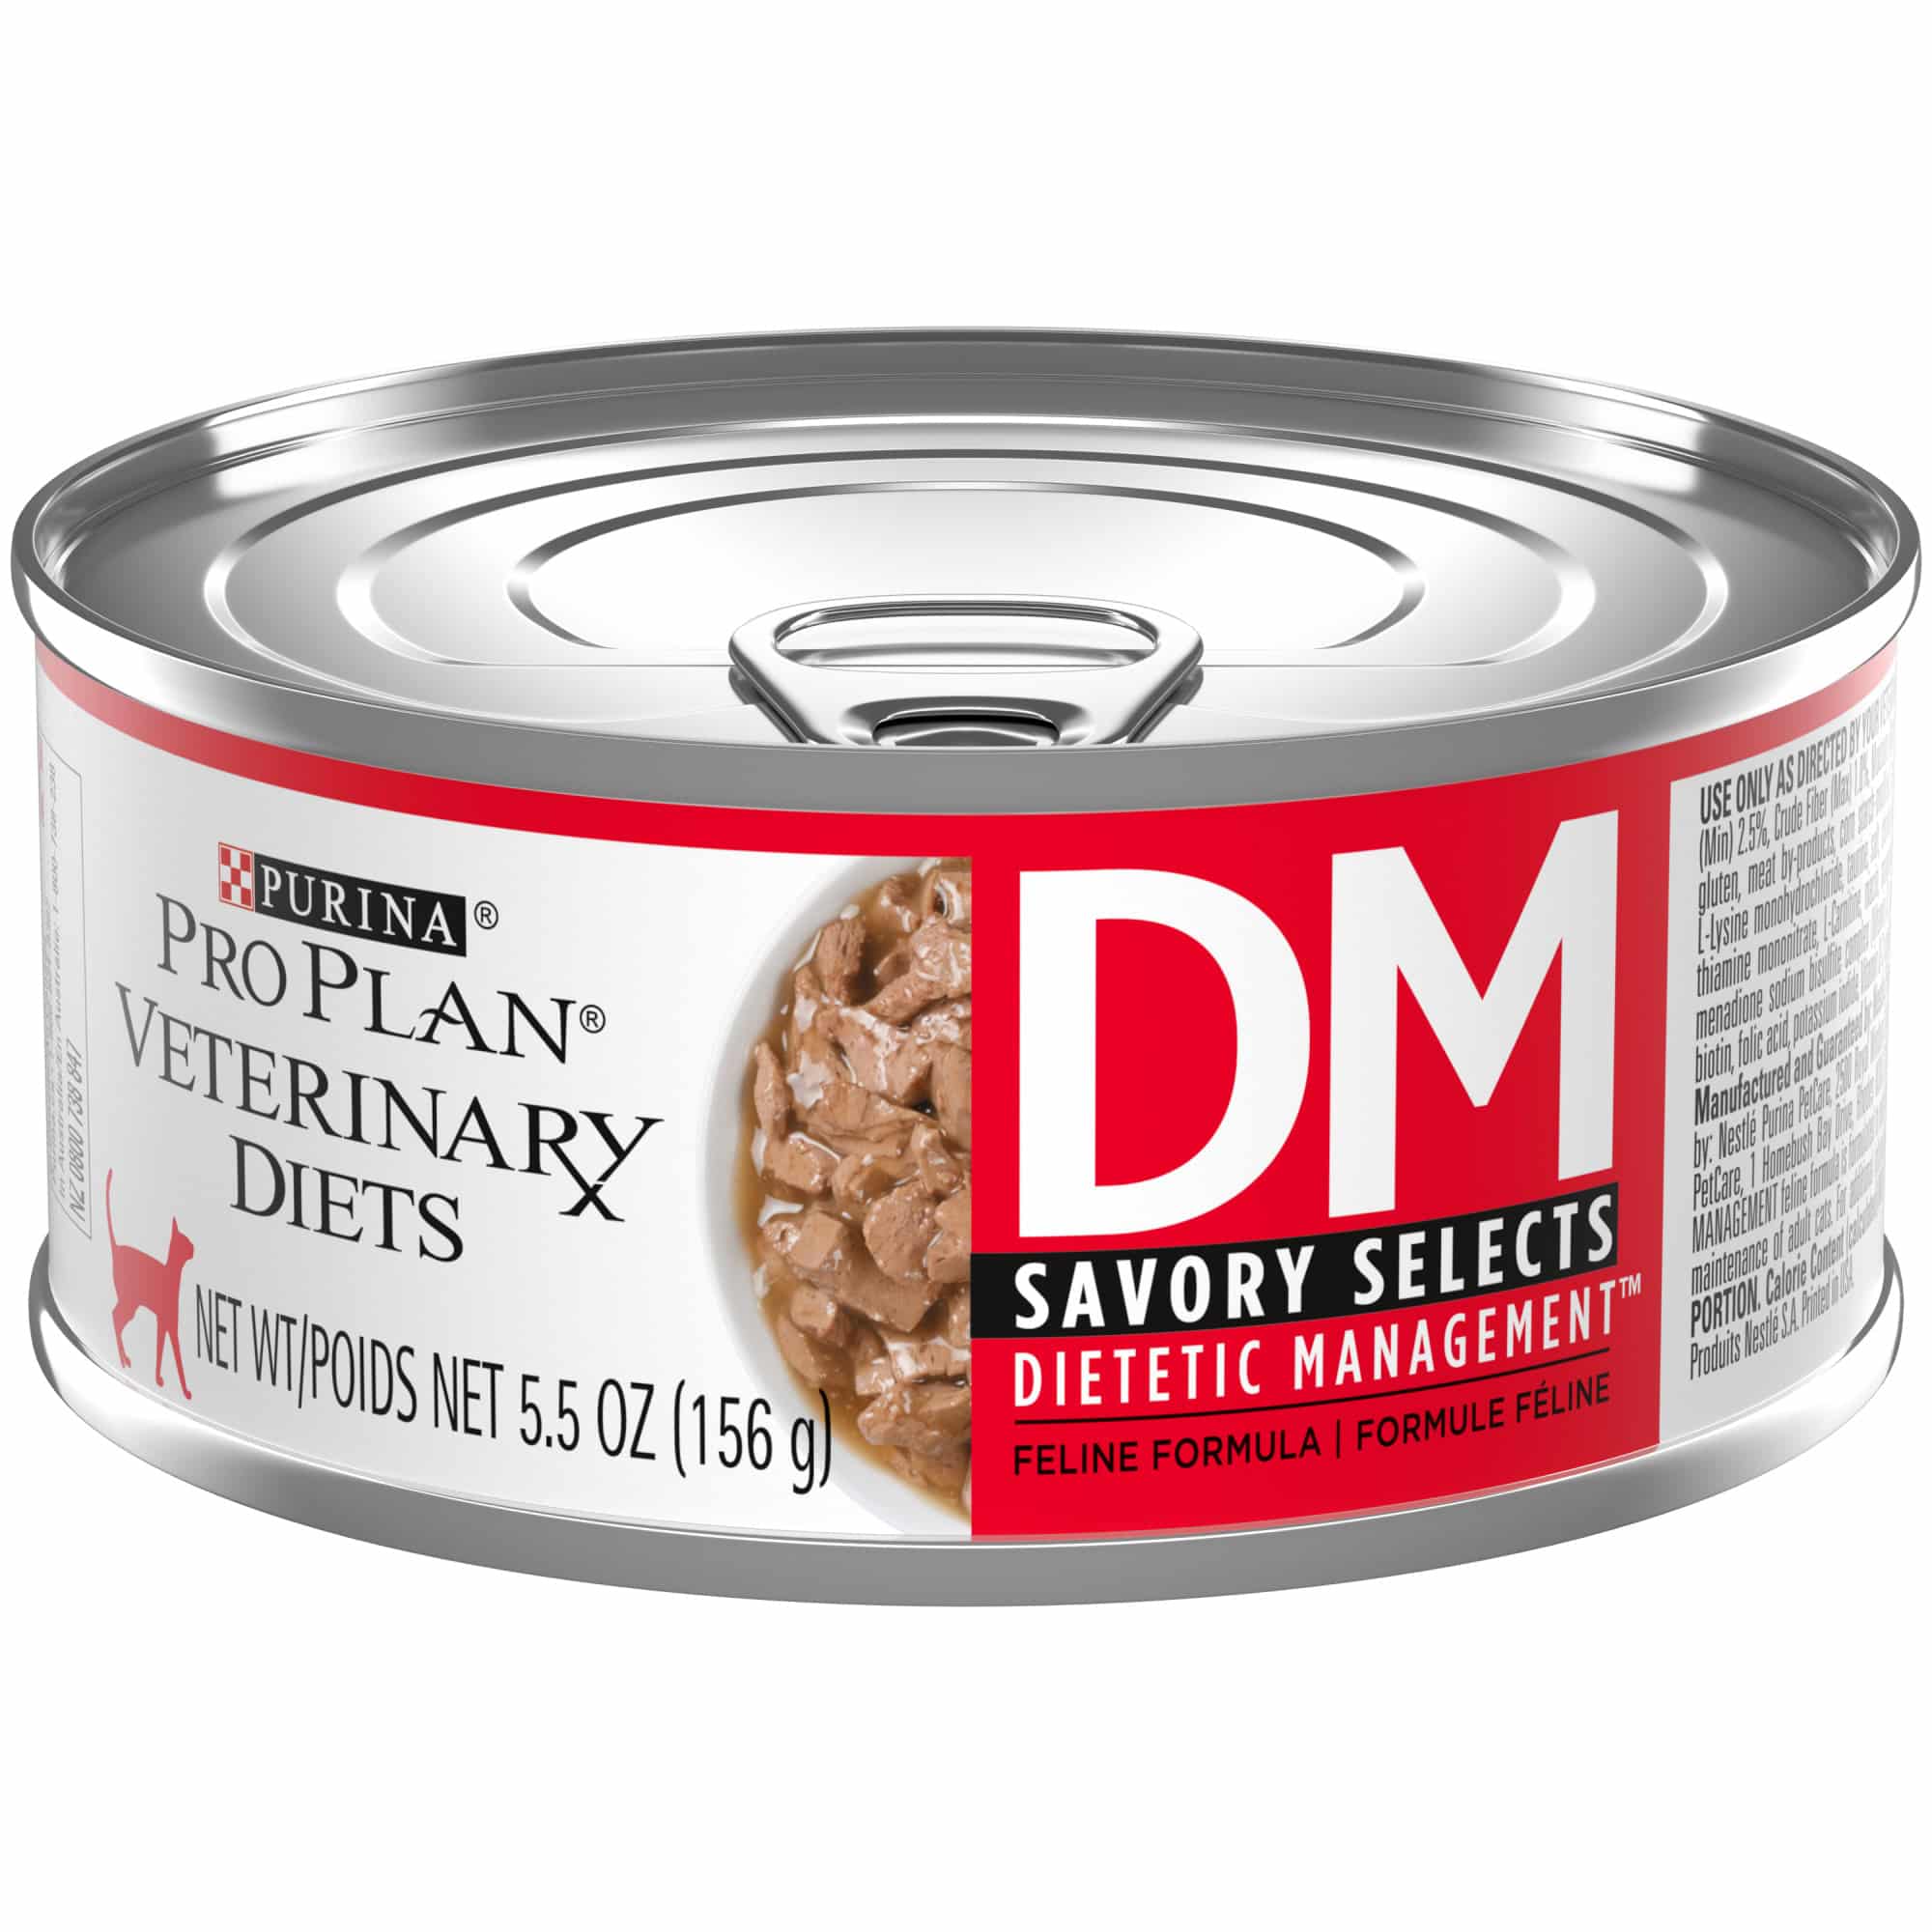 PURINA PRO PLAN VETERINARY DIETS DM Dietetic Management Savory Selects ...